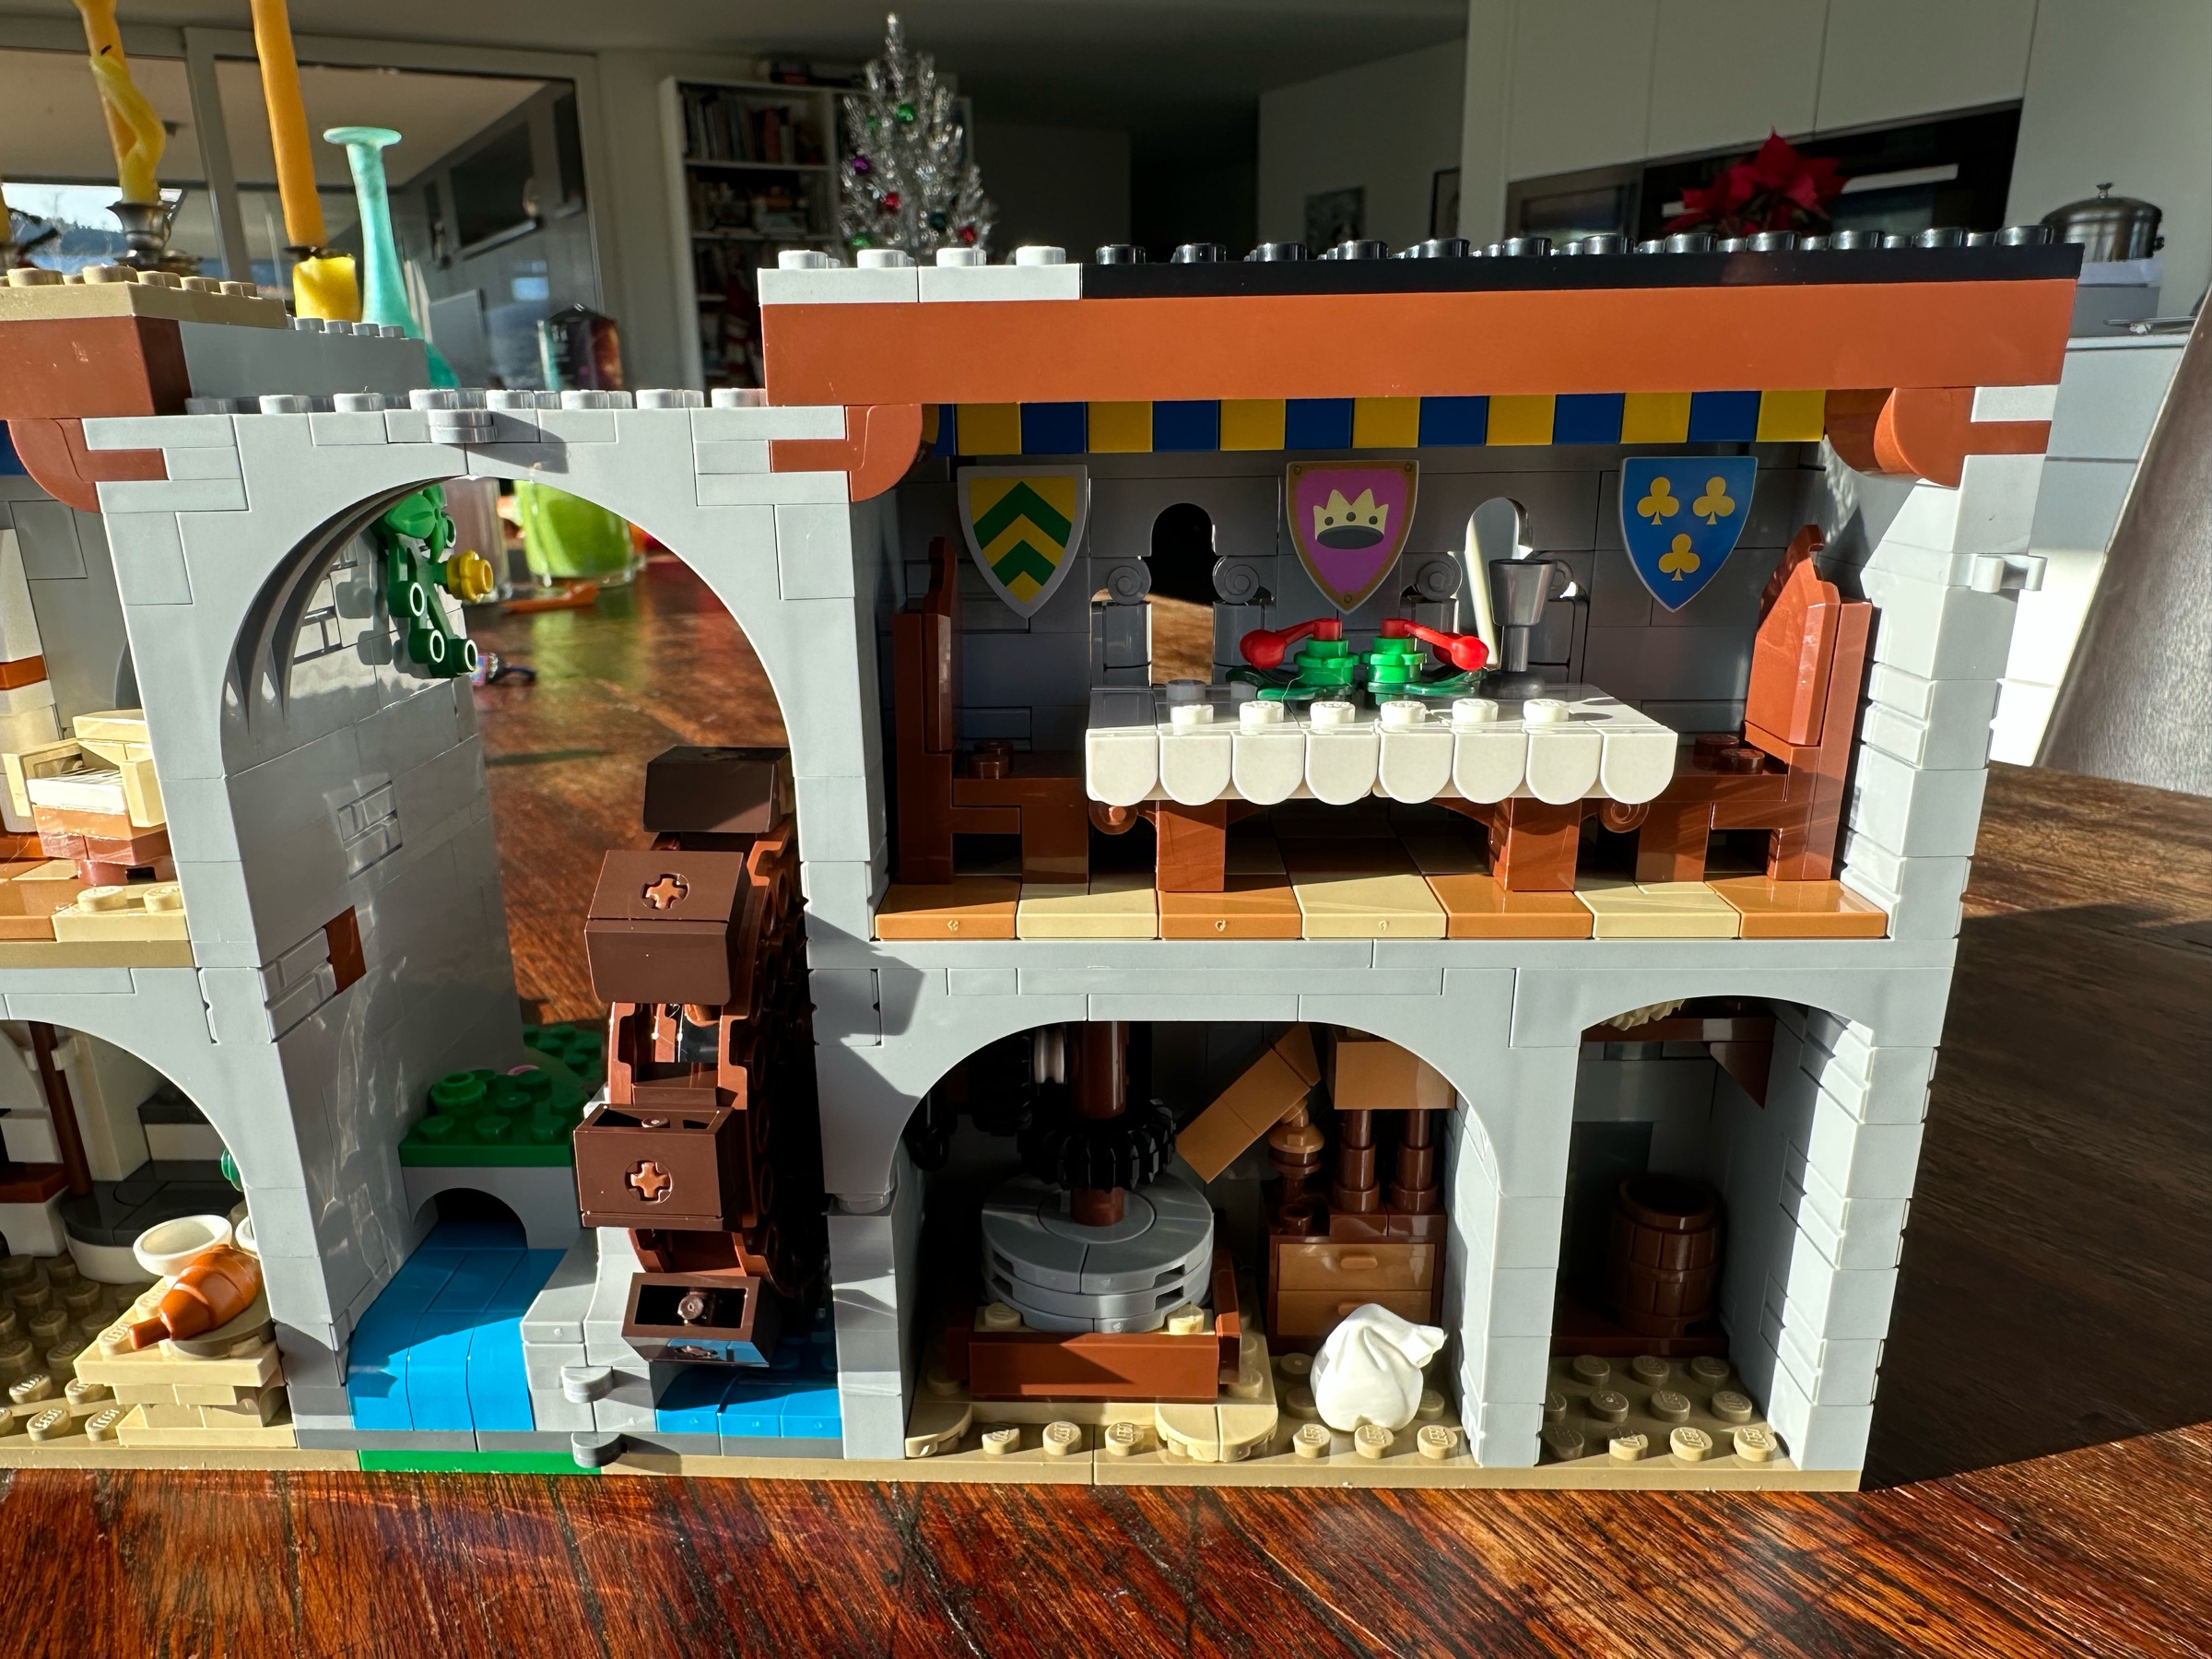 Interior view of LEGO castle section showing a banquet table, two chairs, three shields hung on the wall, and a blue and yellow banner.